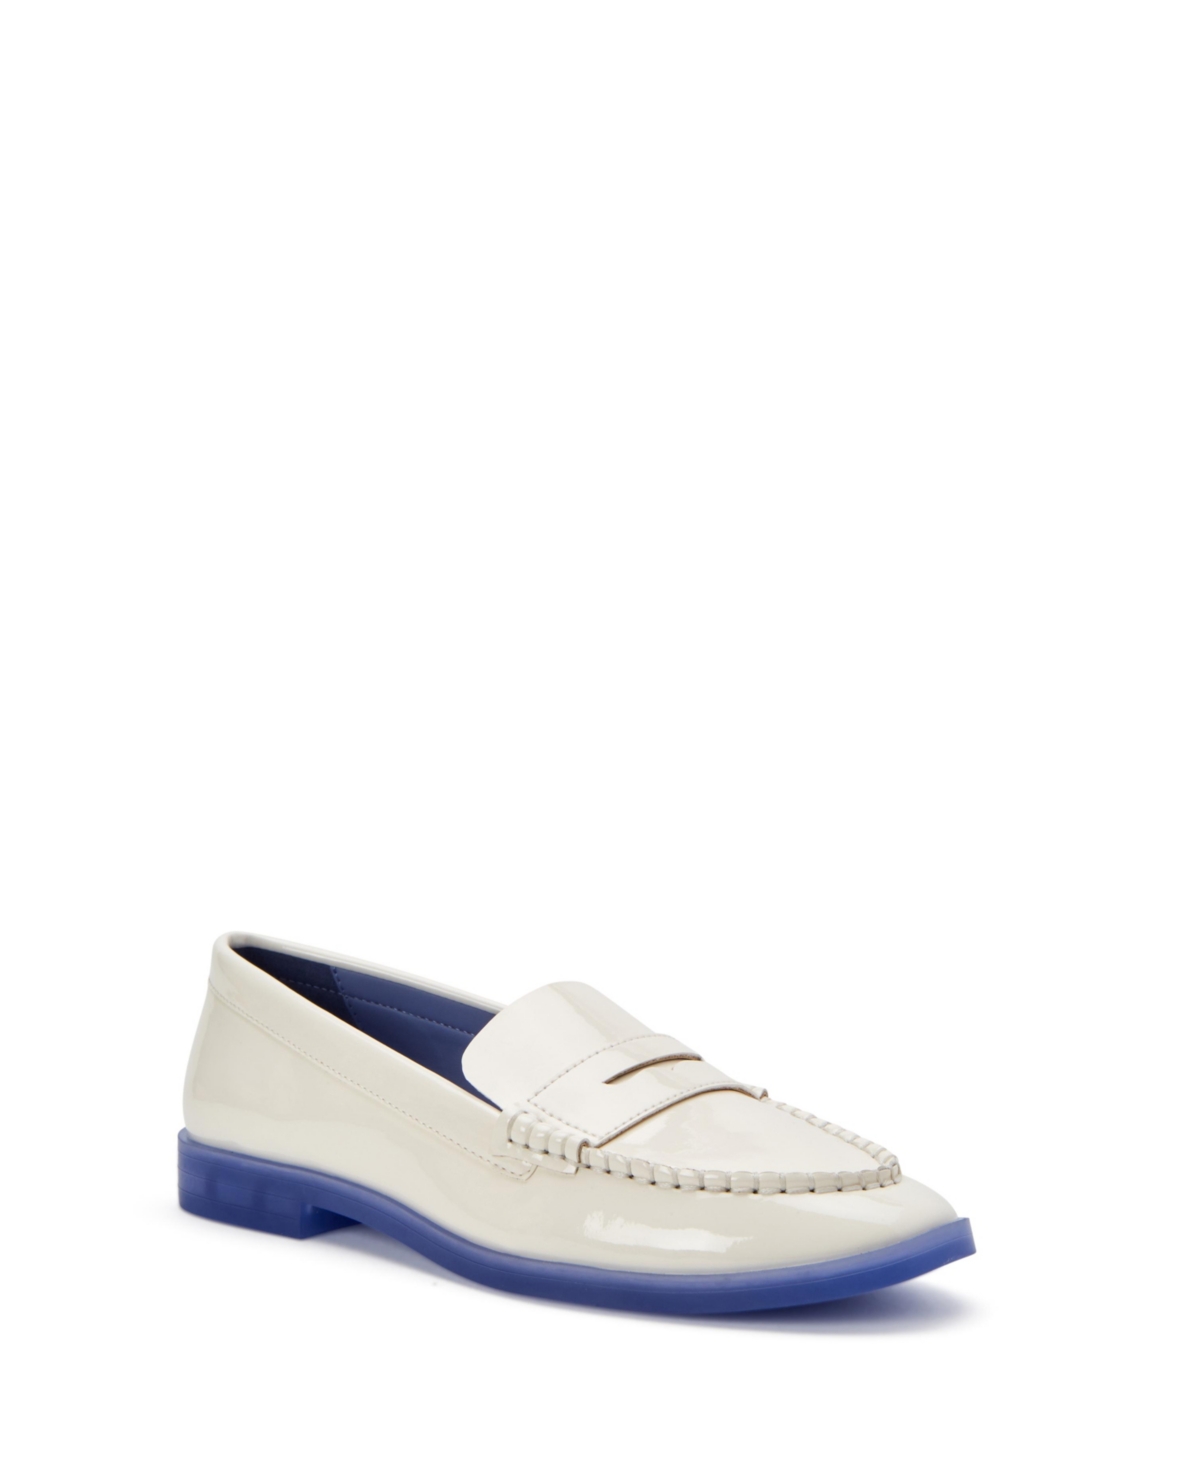 Shop Katy Perry Women's The Geli Penny Loafers Shoes In Unbleach Patent